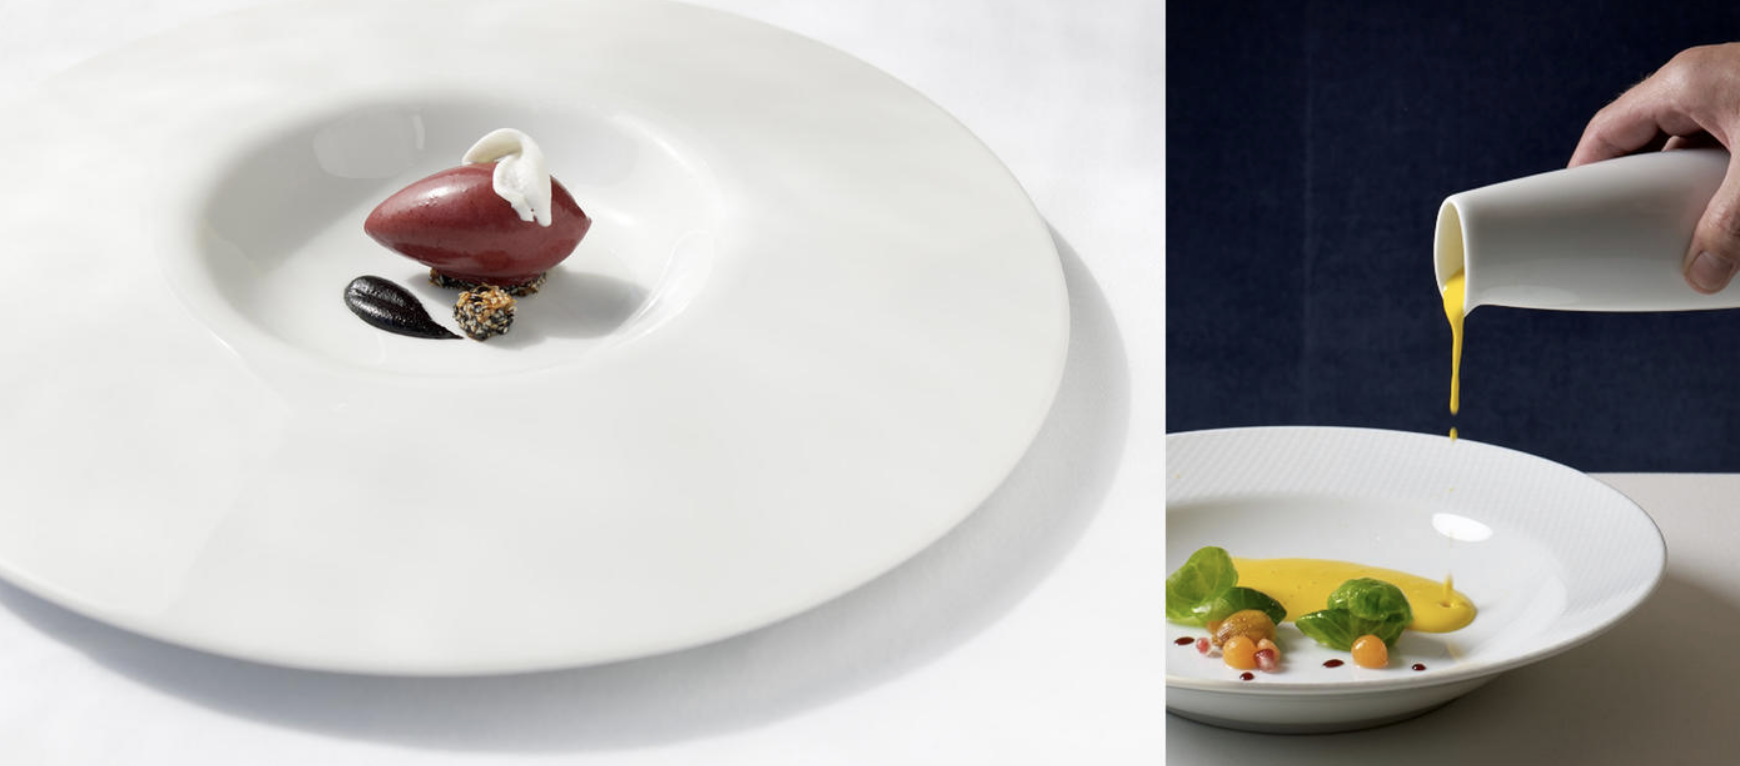 Smart-Alternative-Fuels-The-French-Laundry-Plated-Food-II.png